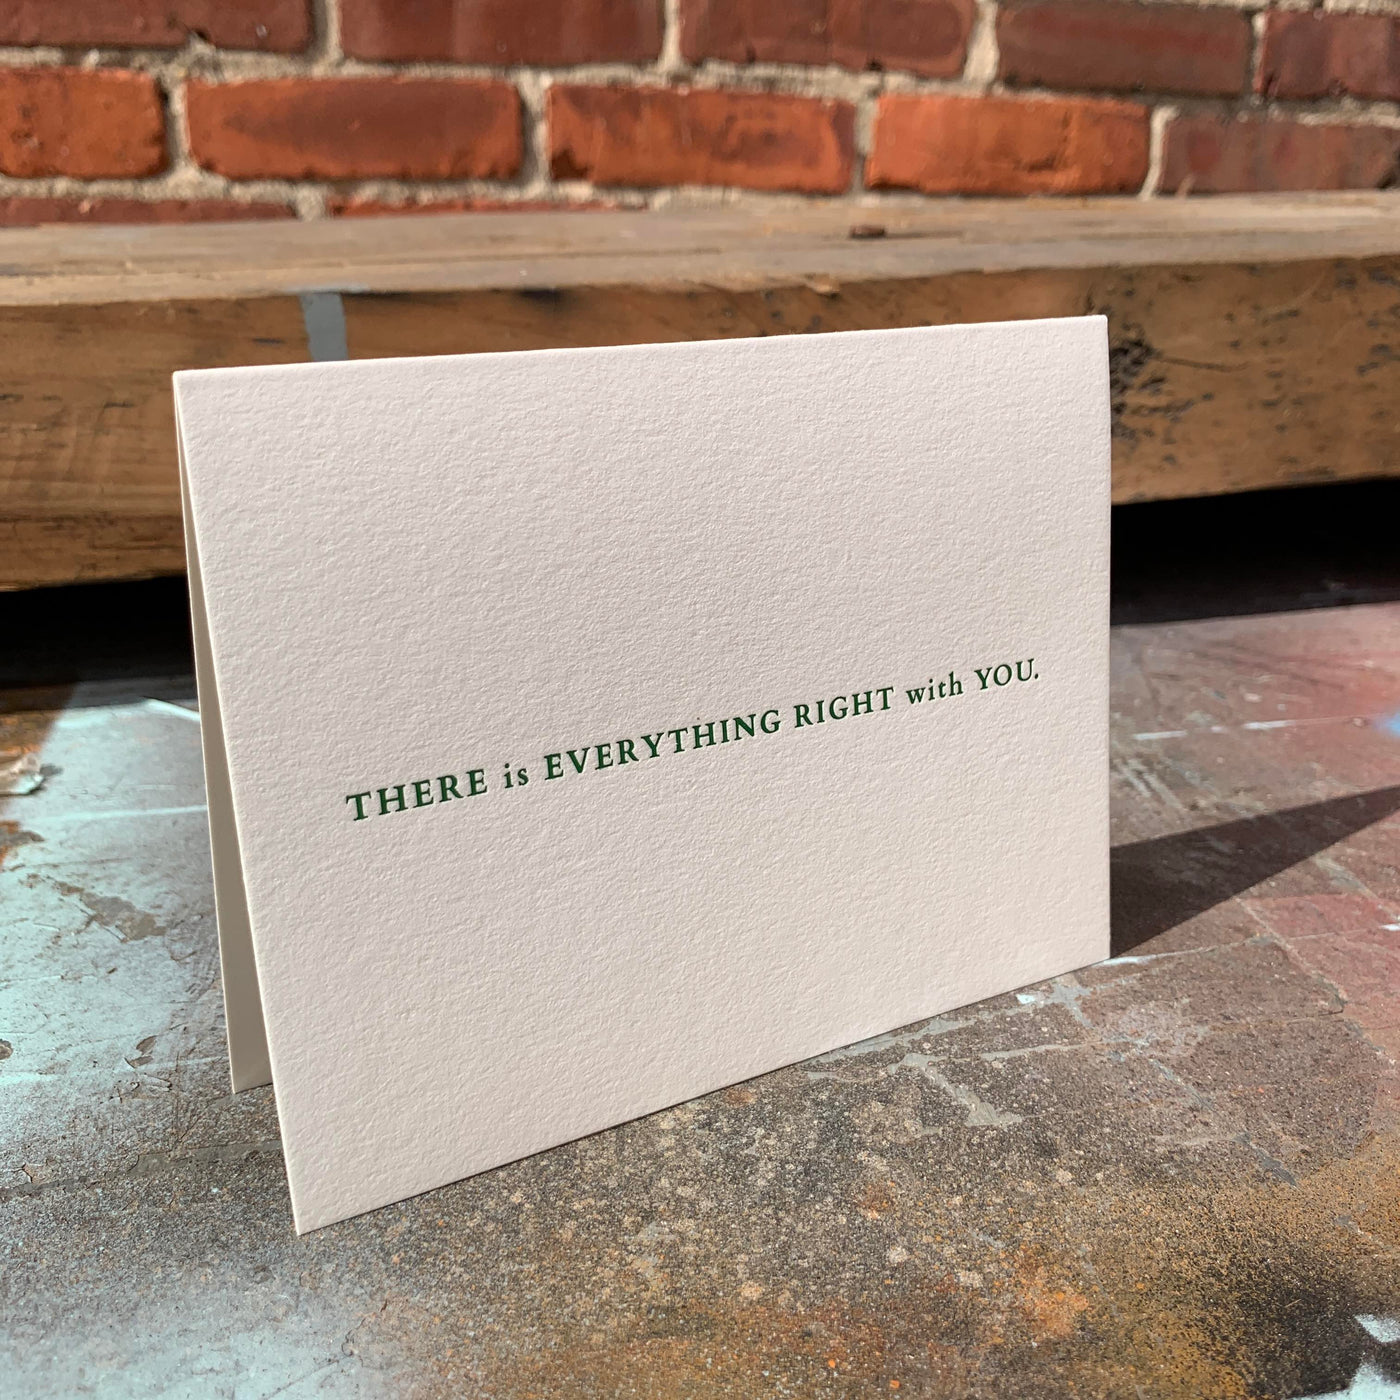 Greeting card on rusted table by beknown. There is everything right with you.